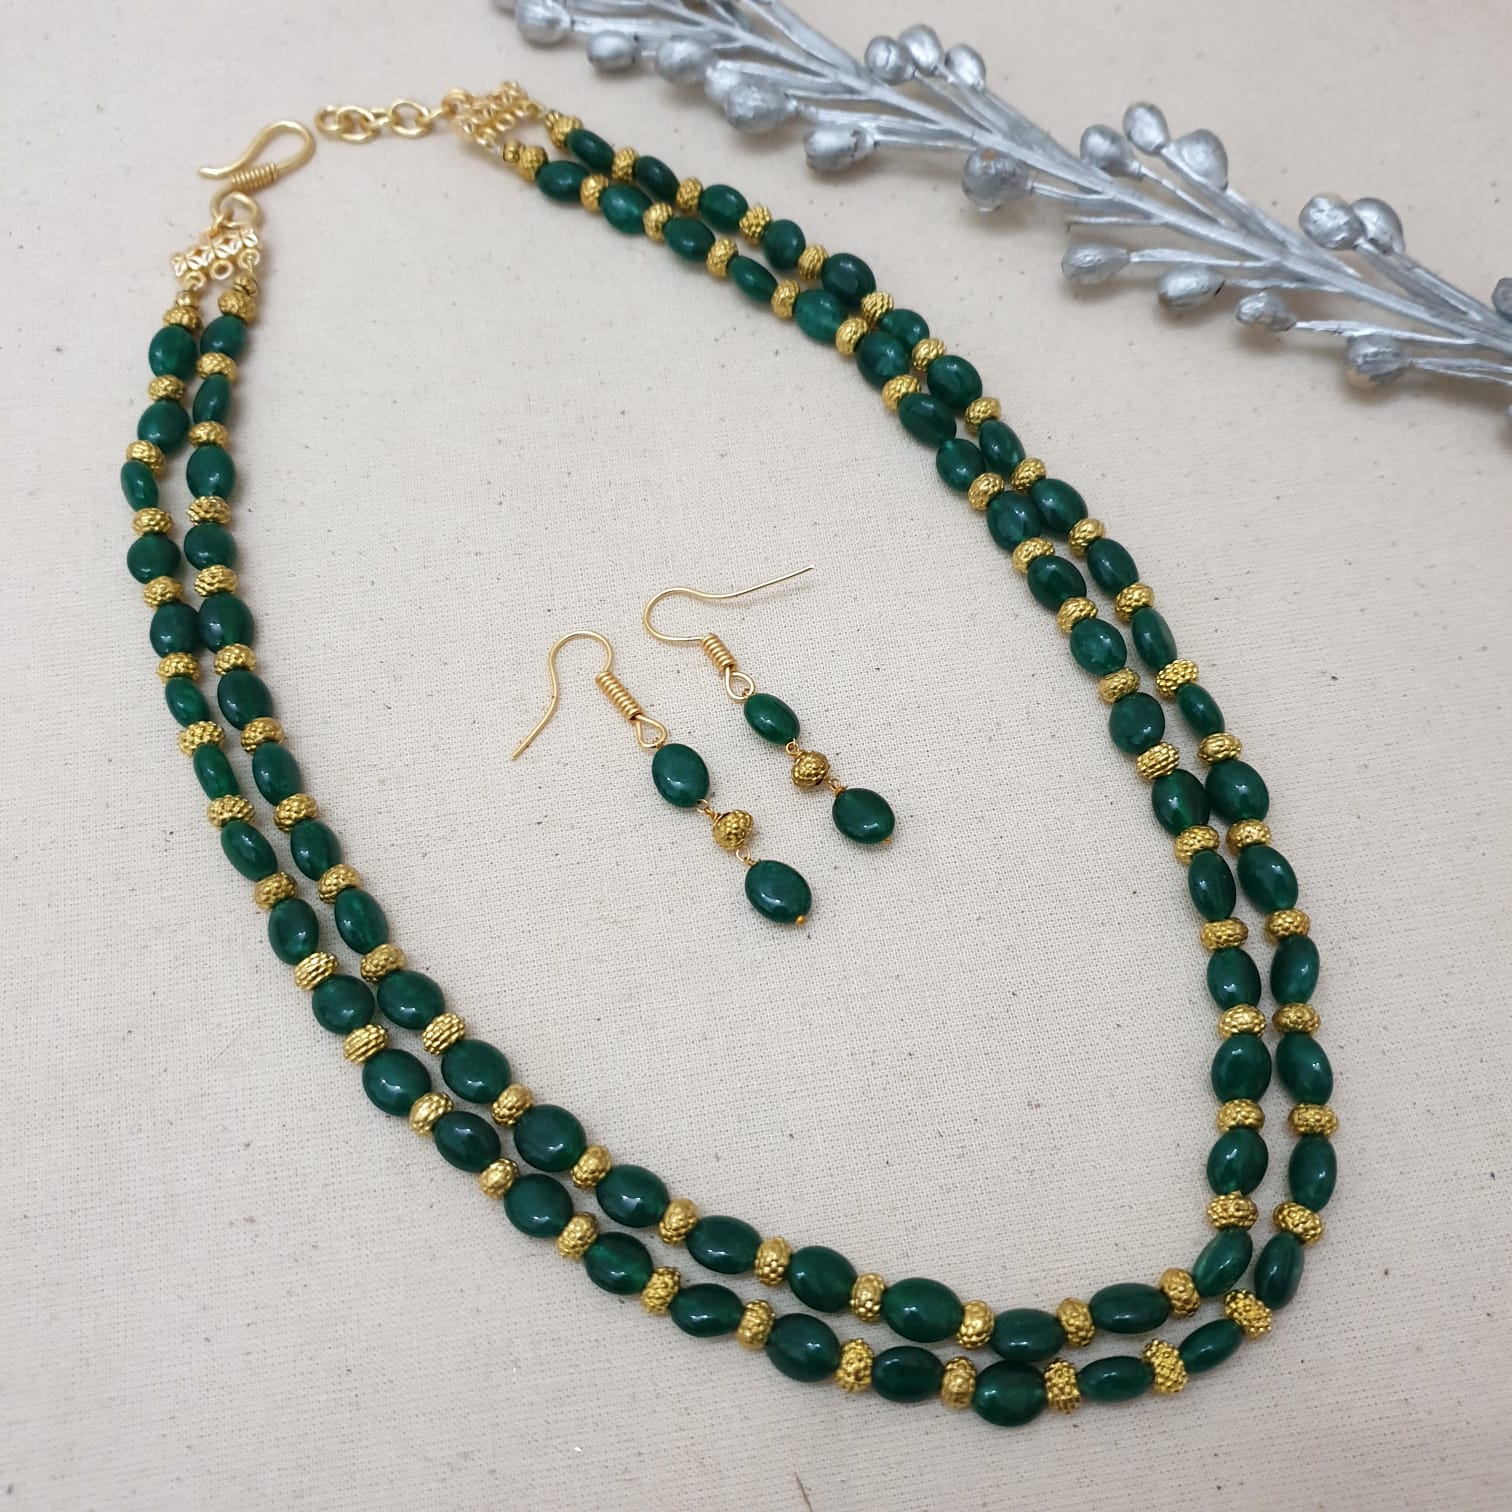 Two Layers Green Beads Stone Necklace and Earrings